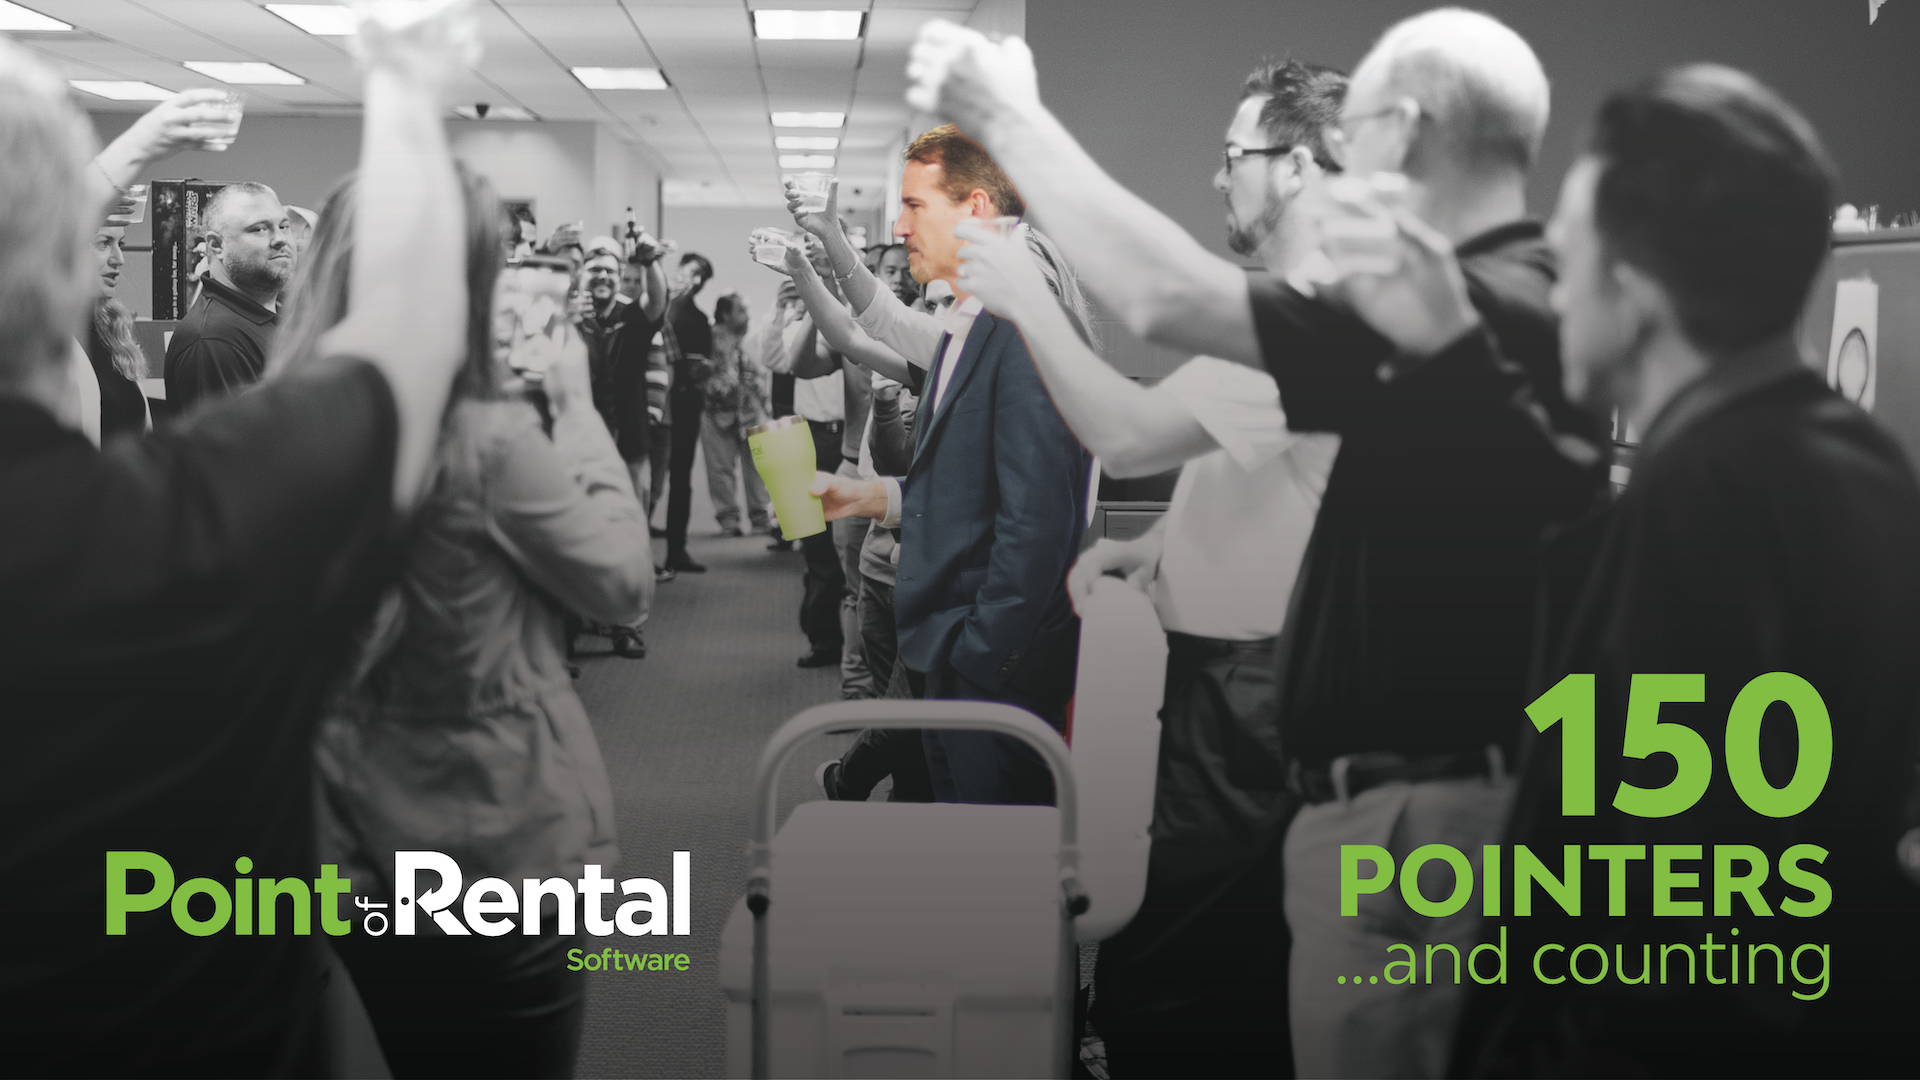 Point of Rental has hired its 150th employee as the company expands to serve its increasing worldwide userbase.